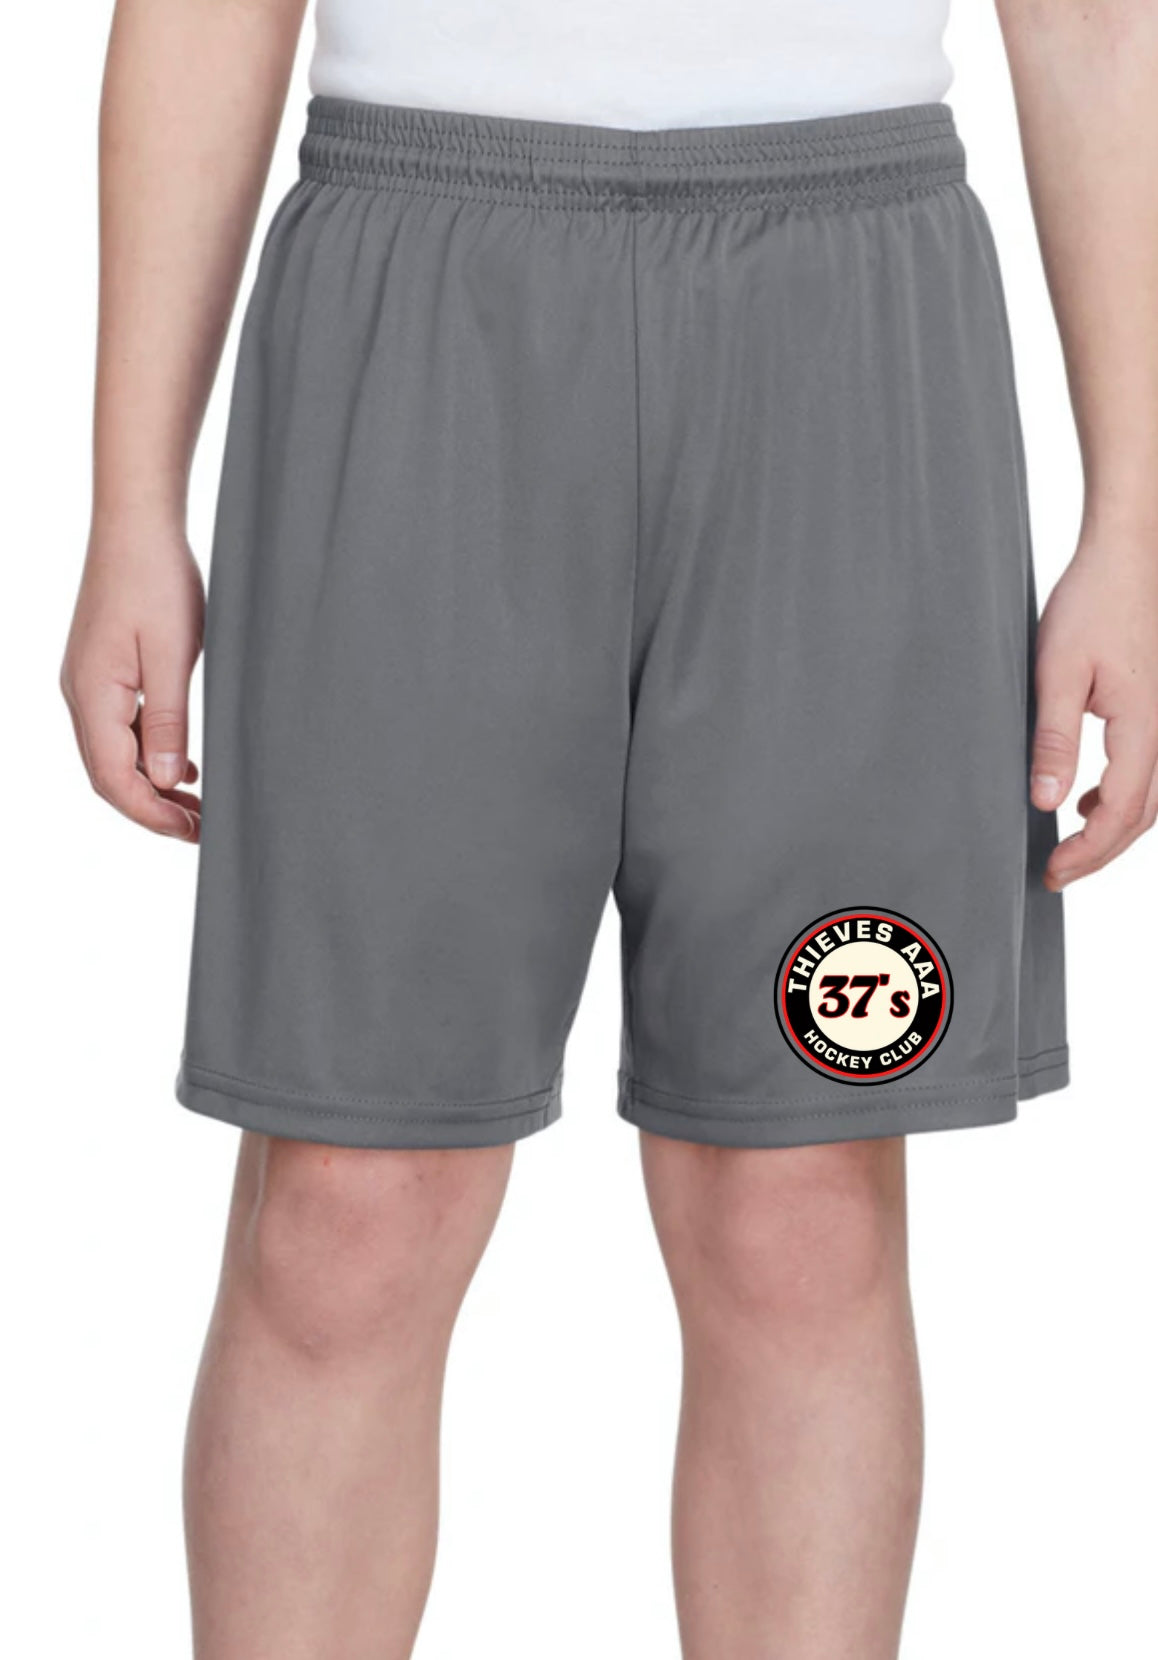 Thieves Youth Shorts